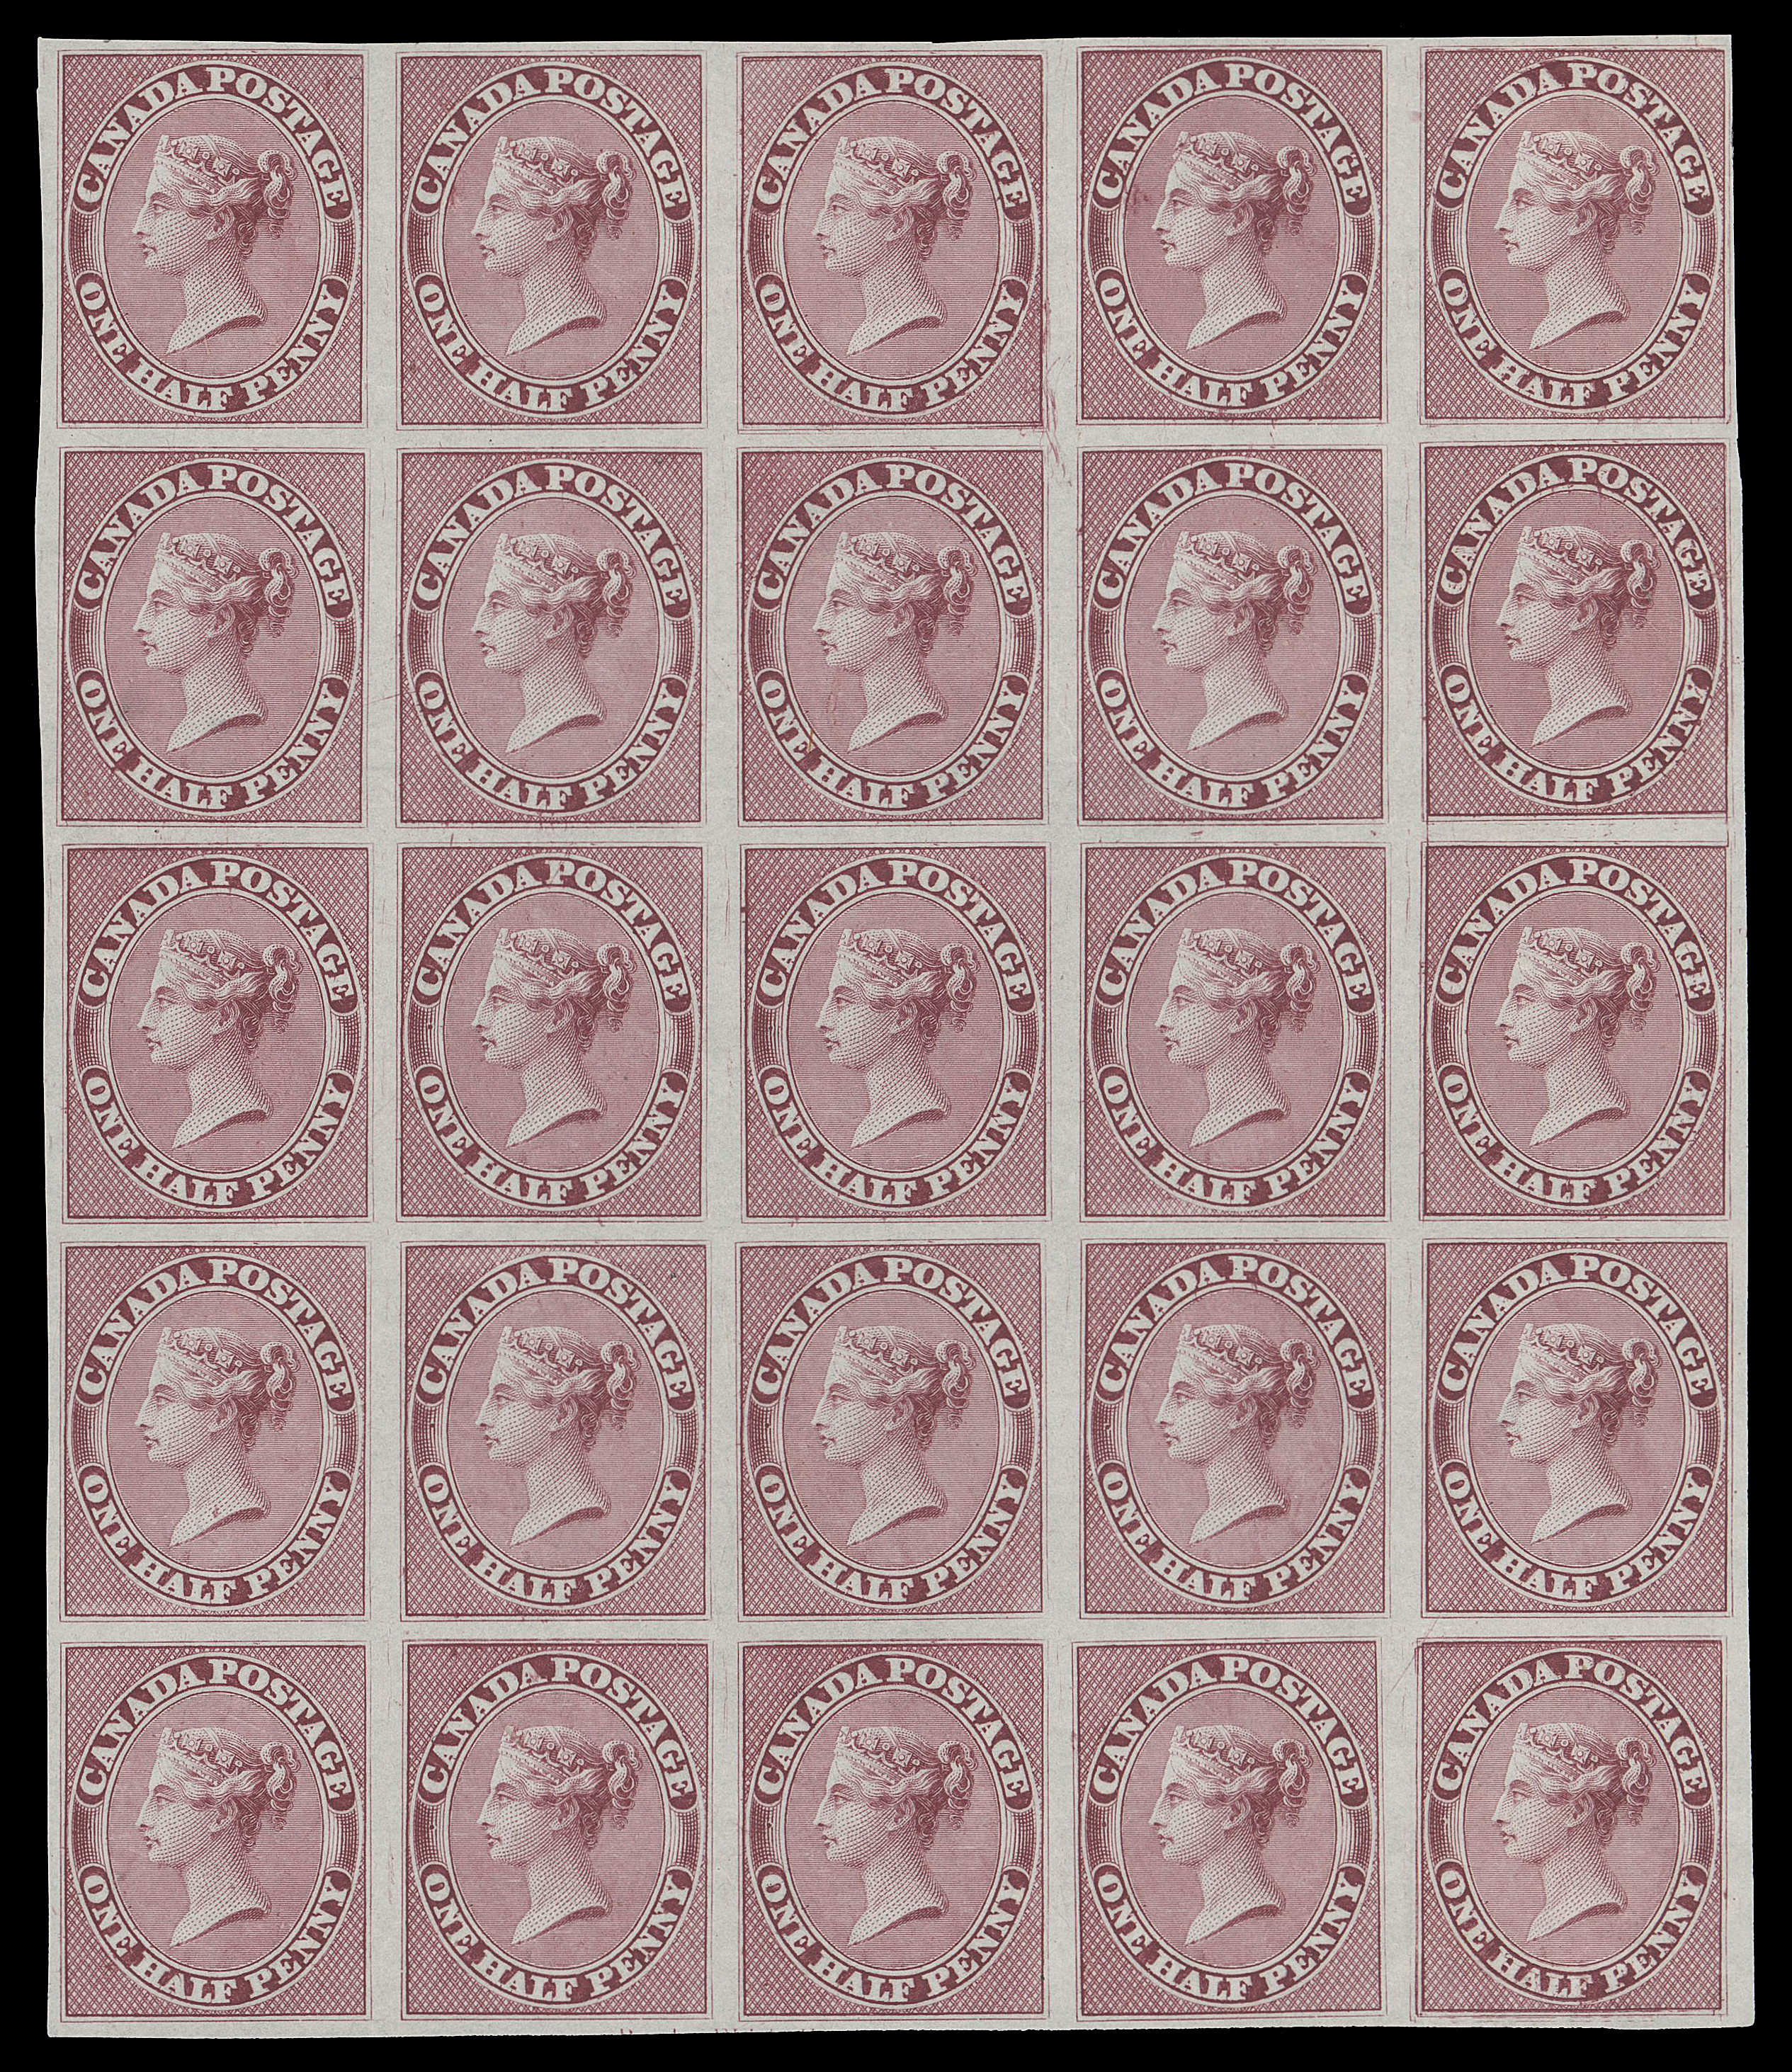 HALF PENNY AND ONE CENT  8TC + varieties,An attractive plate proof block of 25 on india paper, in a deeper shade than the issued stamp, Positions 68-72 / 116-120 in the plate of 120-subjects, showing five different Major Re-entries at Positions 70, 72, 84, 96, 120, the last four shown in the last column, VF (Unitrade cat. $7,500 as normal proofs)